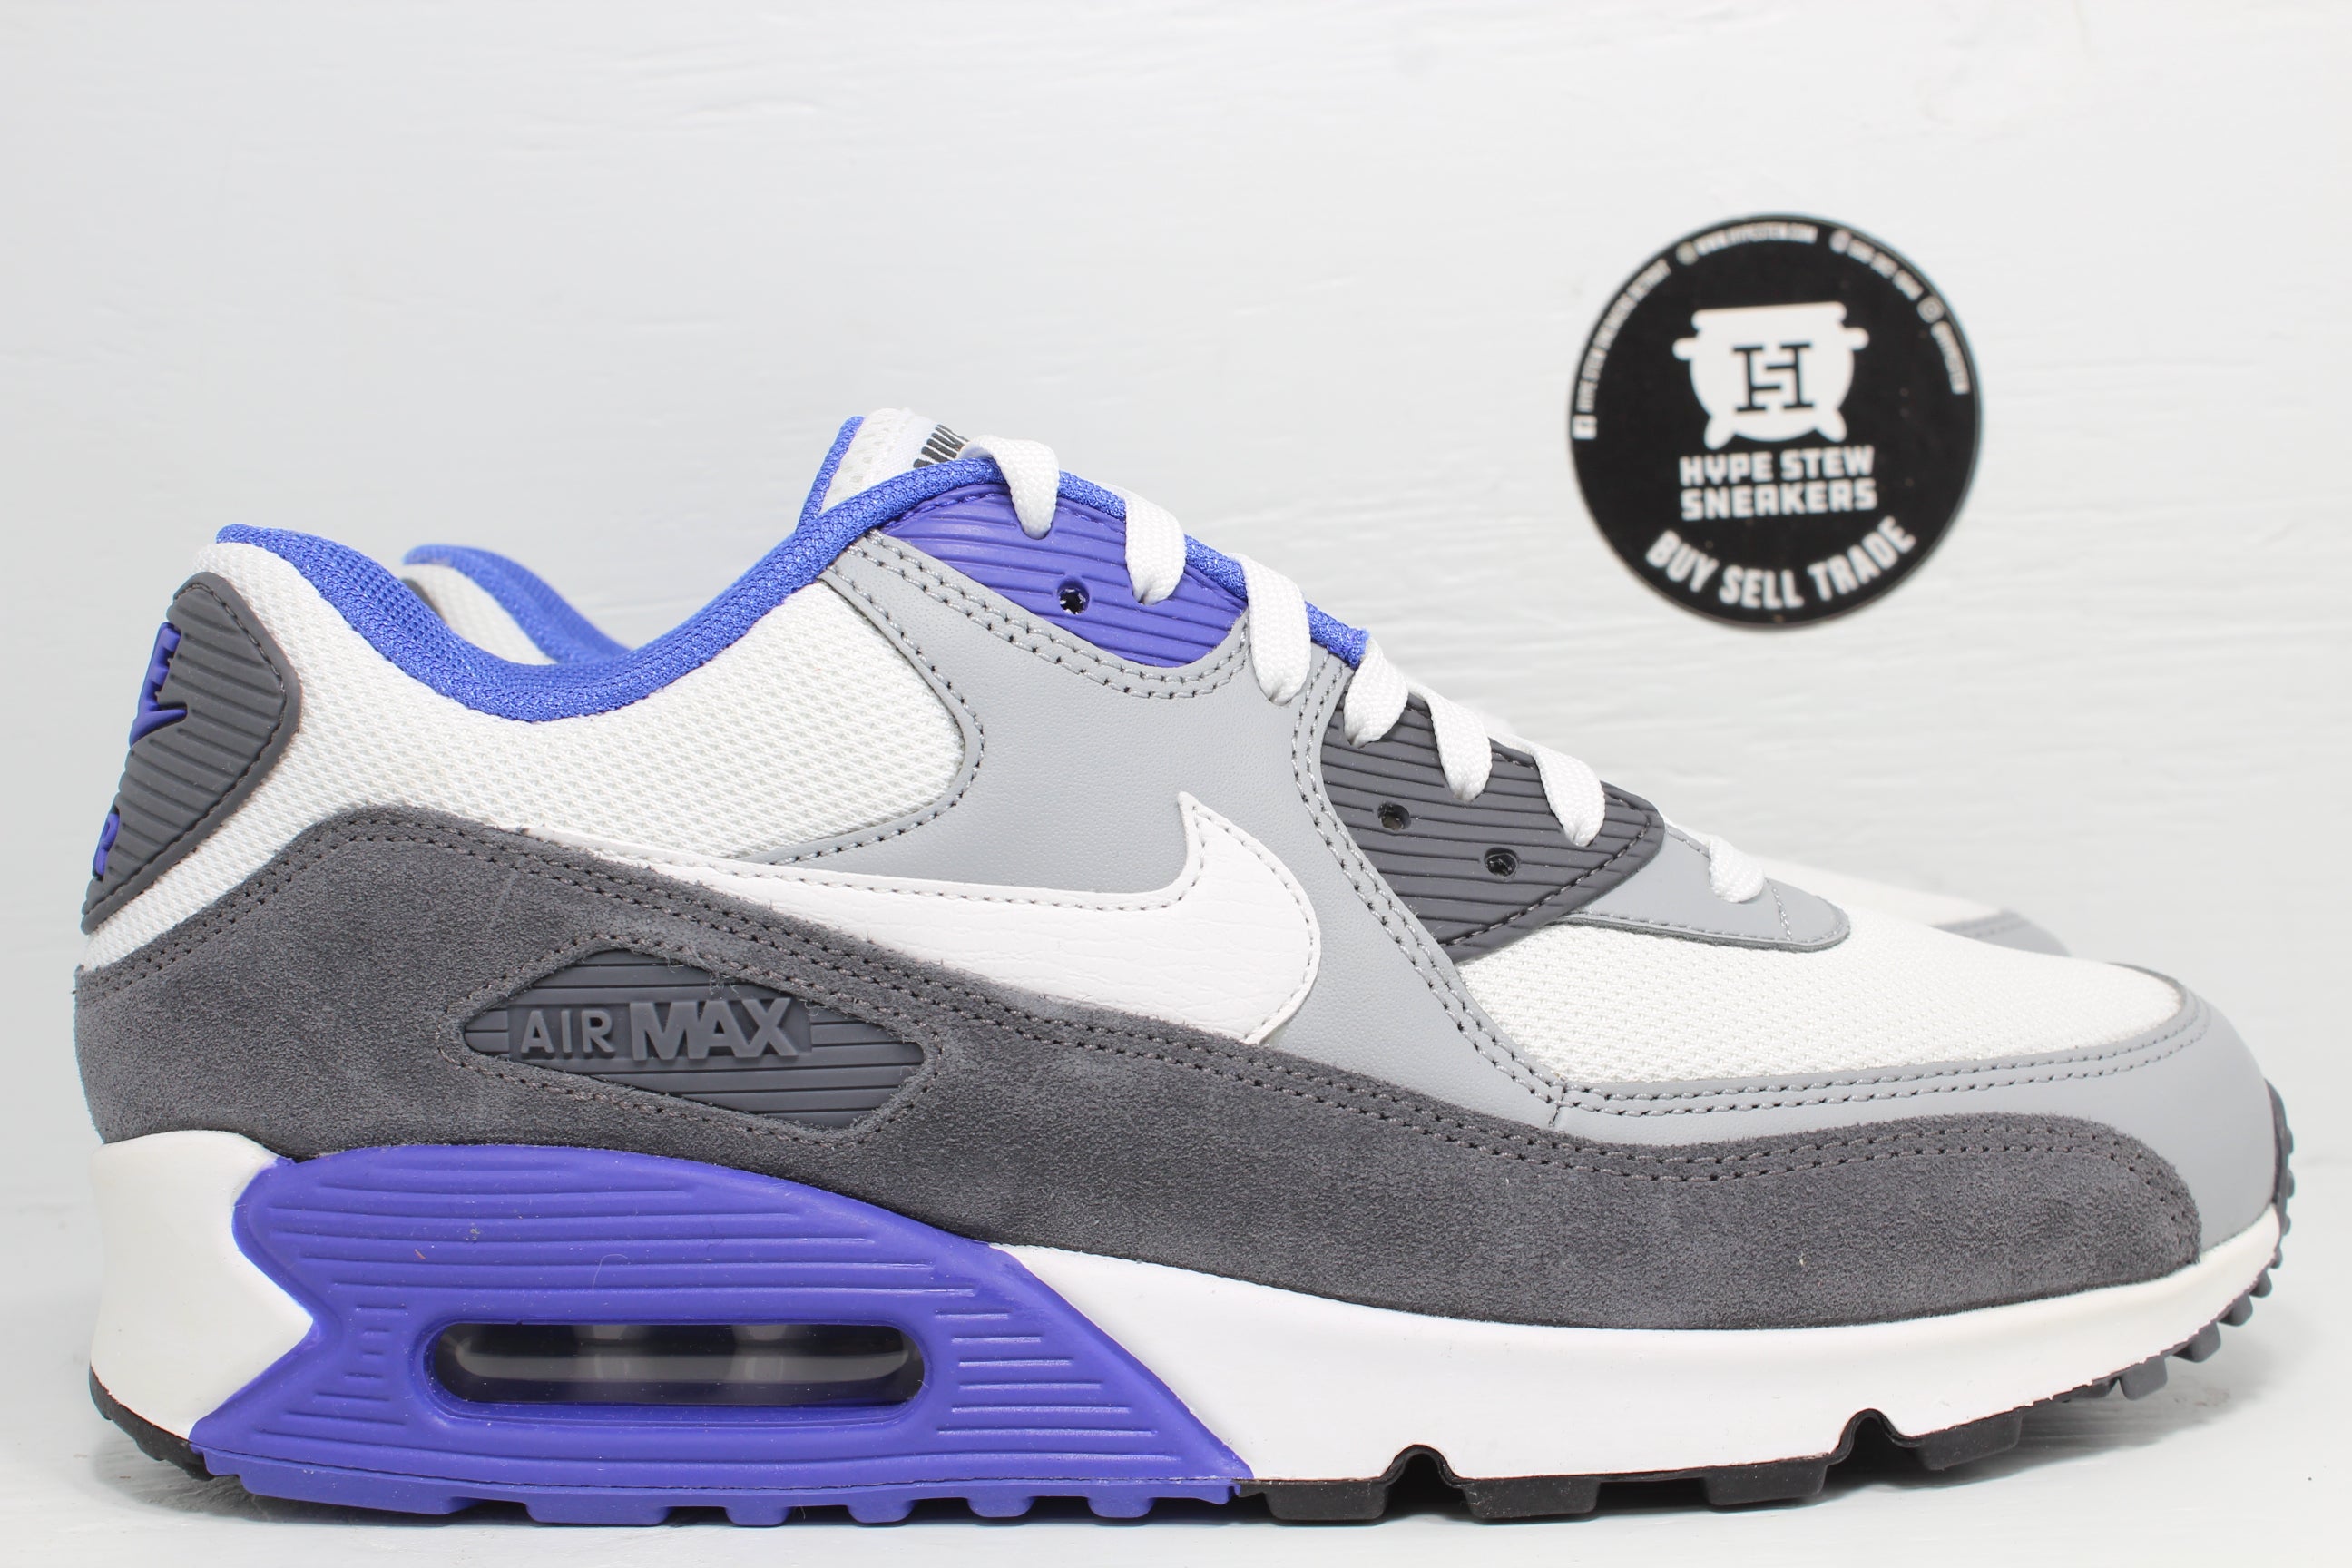 Air Max 90 White Grey Violet | Hype Sneakers Detroit